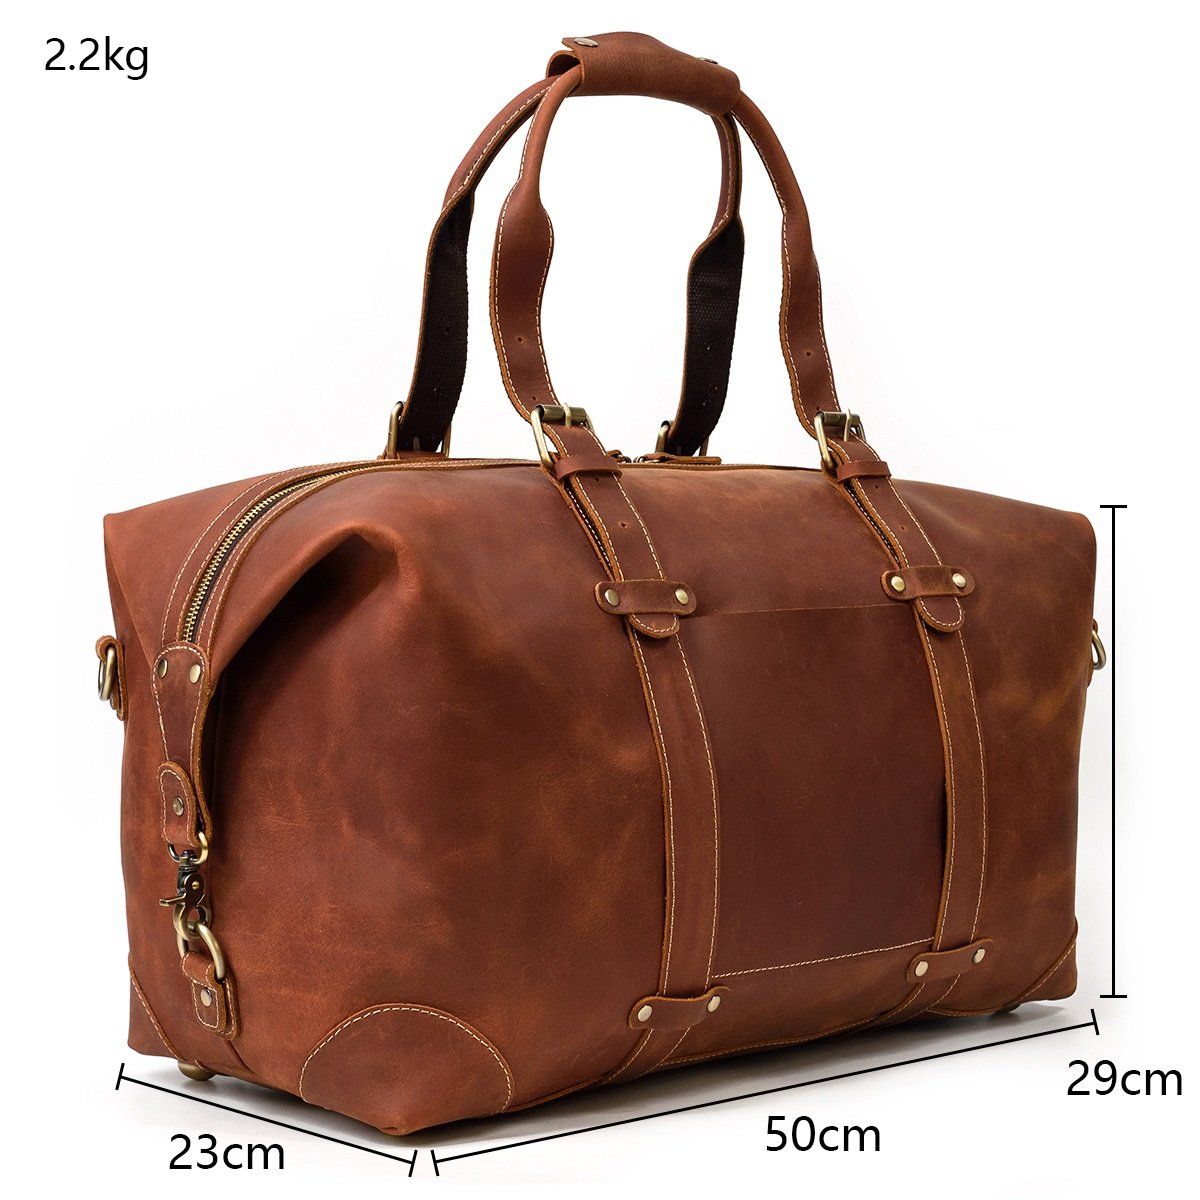 Hot Sell 55cm Classical Men Duffle Bag For Women Travel Bags Mens Hand Luggage  Travel Bag Men PVC Leather Handbags Large Cross Body Totes 45 50 55cm From  Sxqei, $80.25